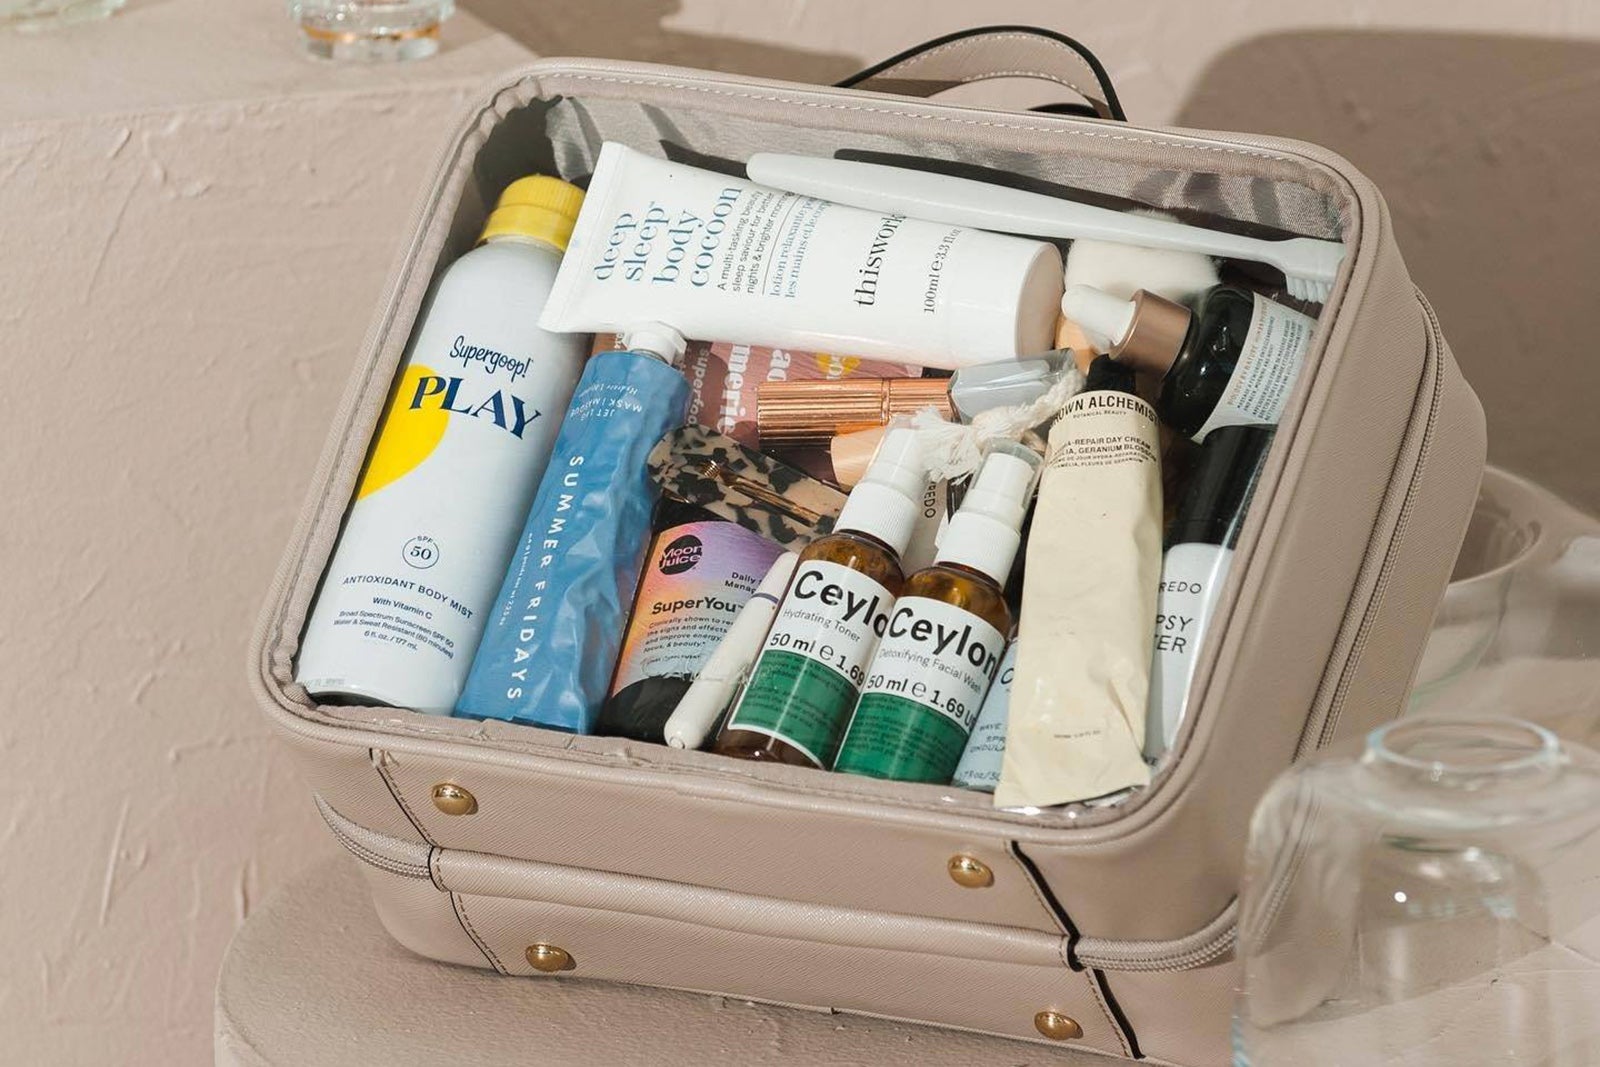 The Best TSA Approved Quart Bag and How to Pack It 